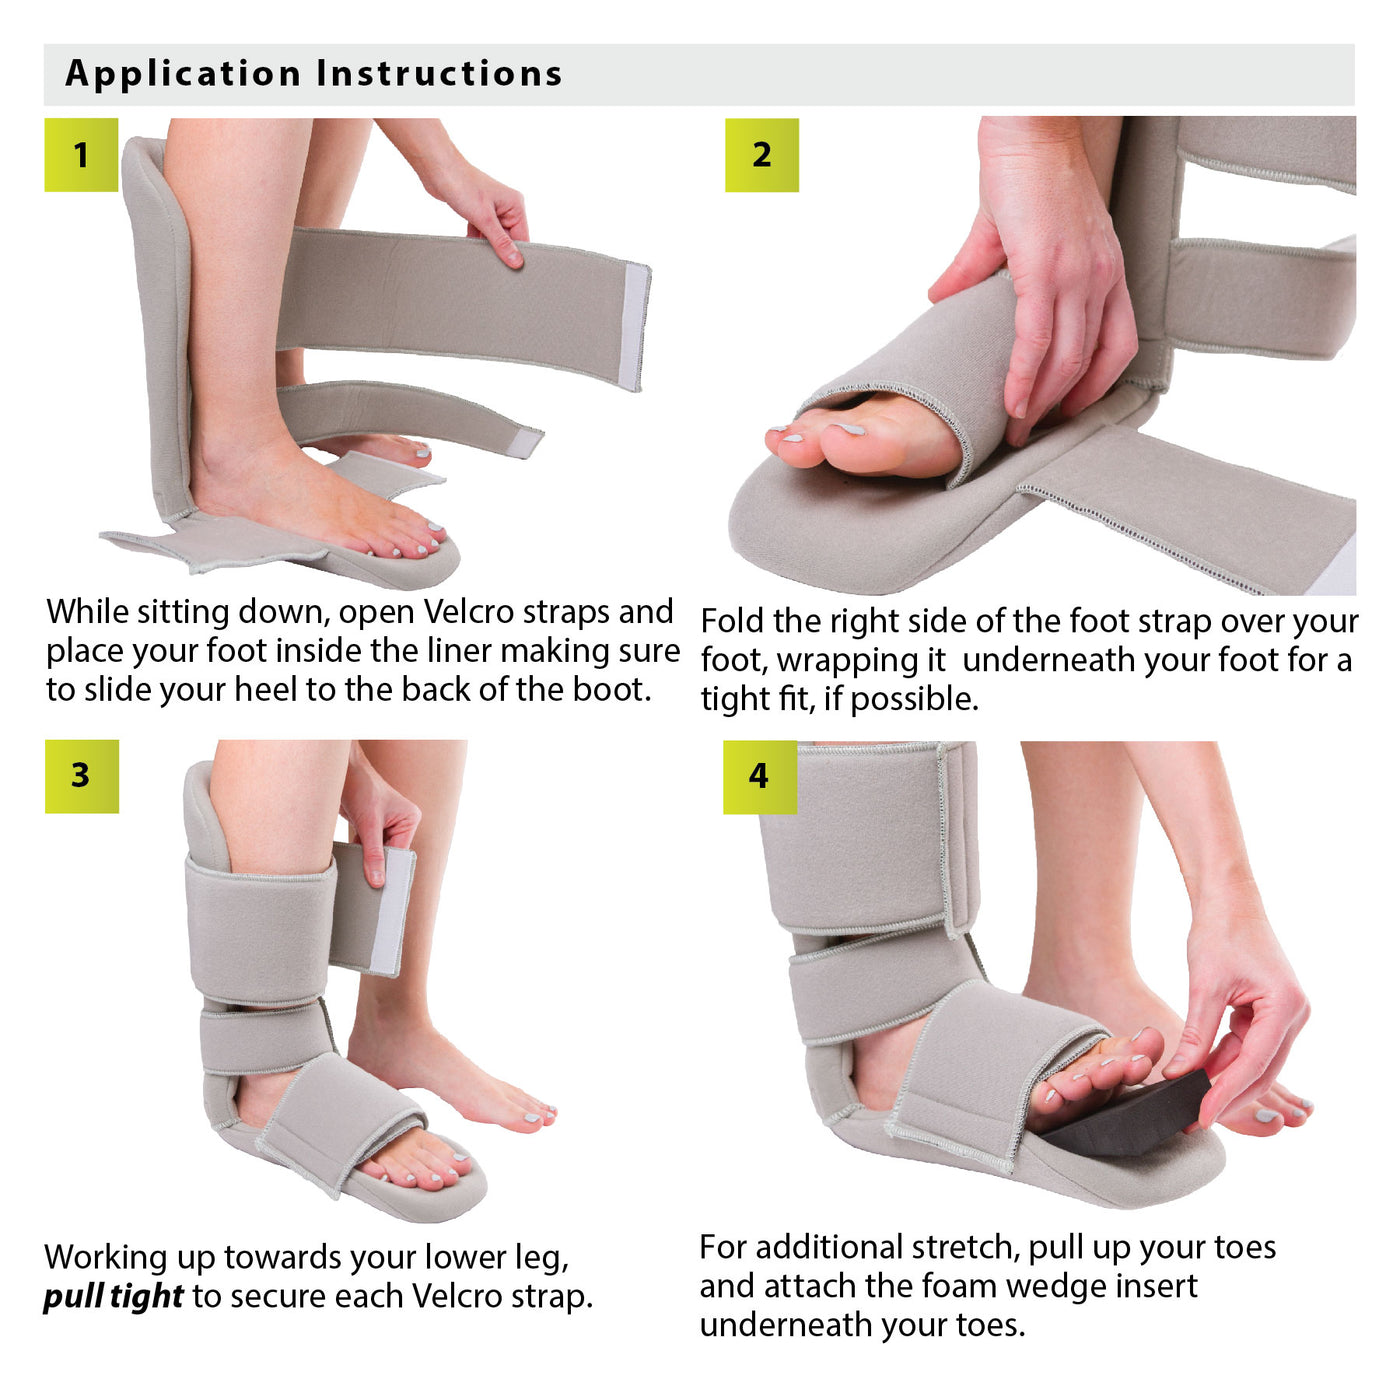 How to put on the padded night splint instruction sheet